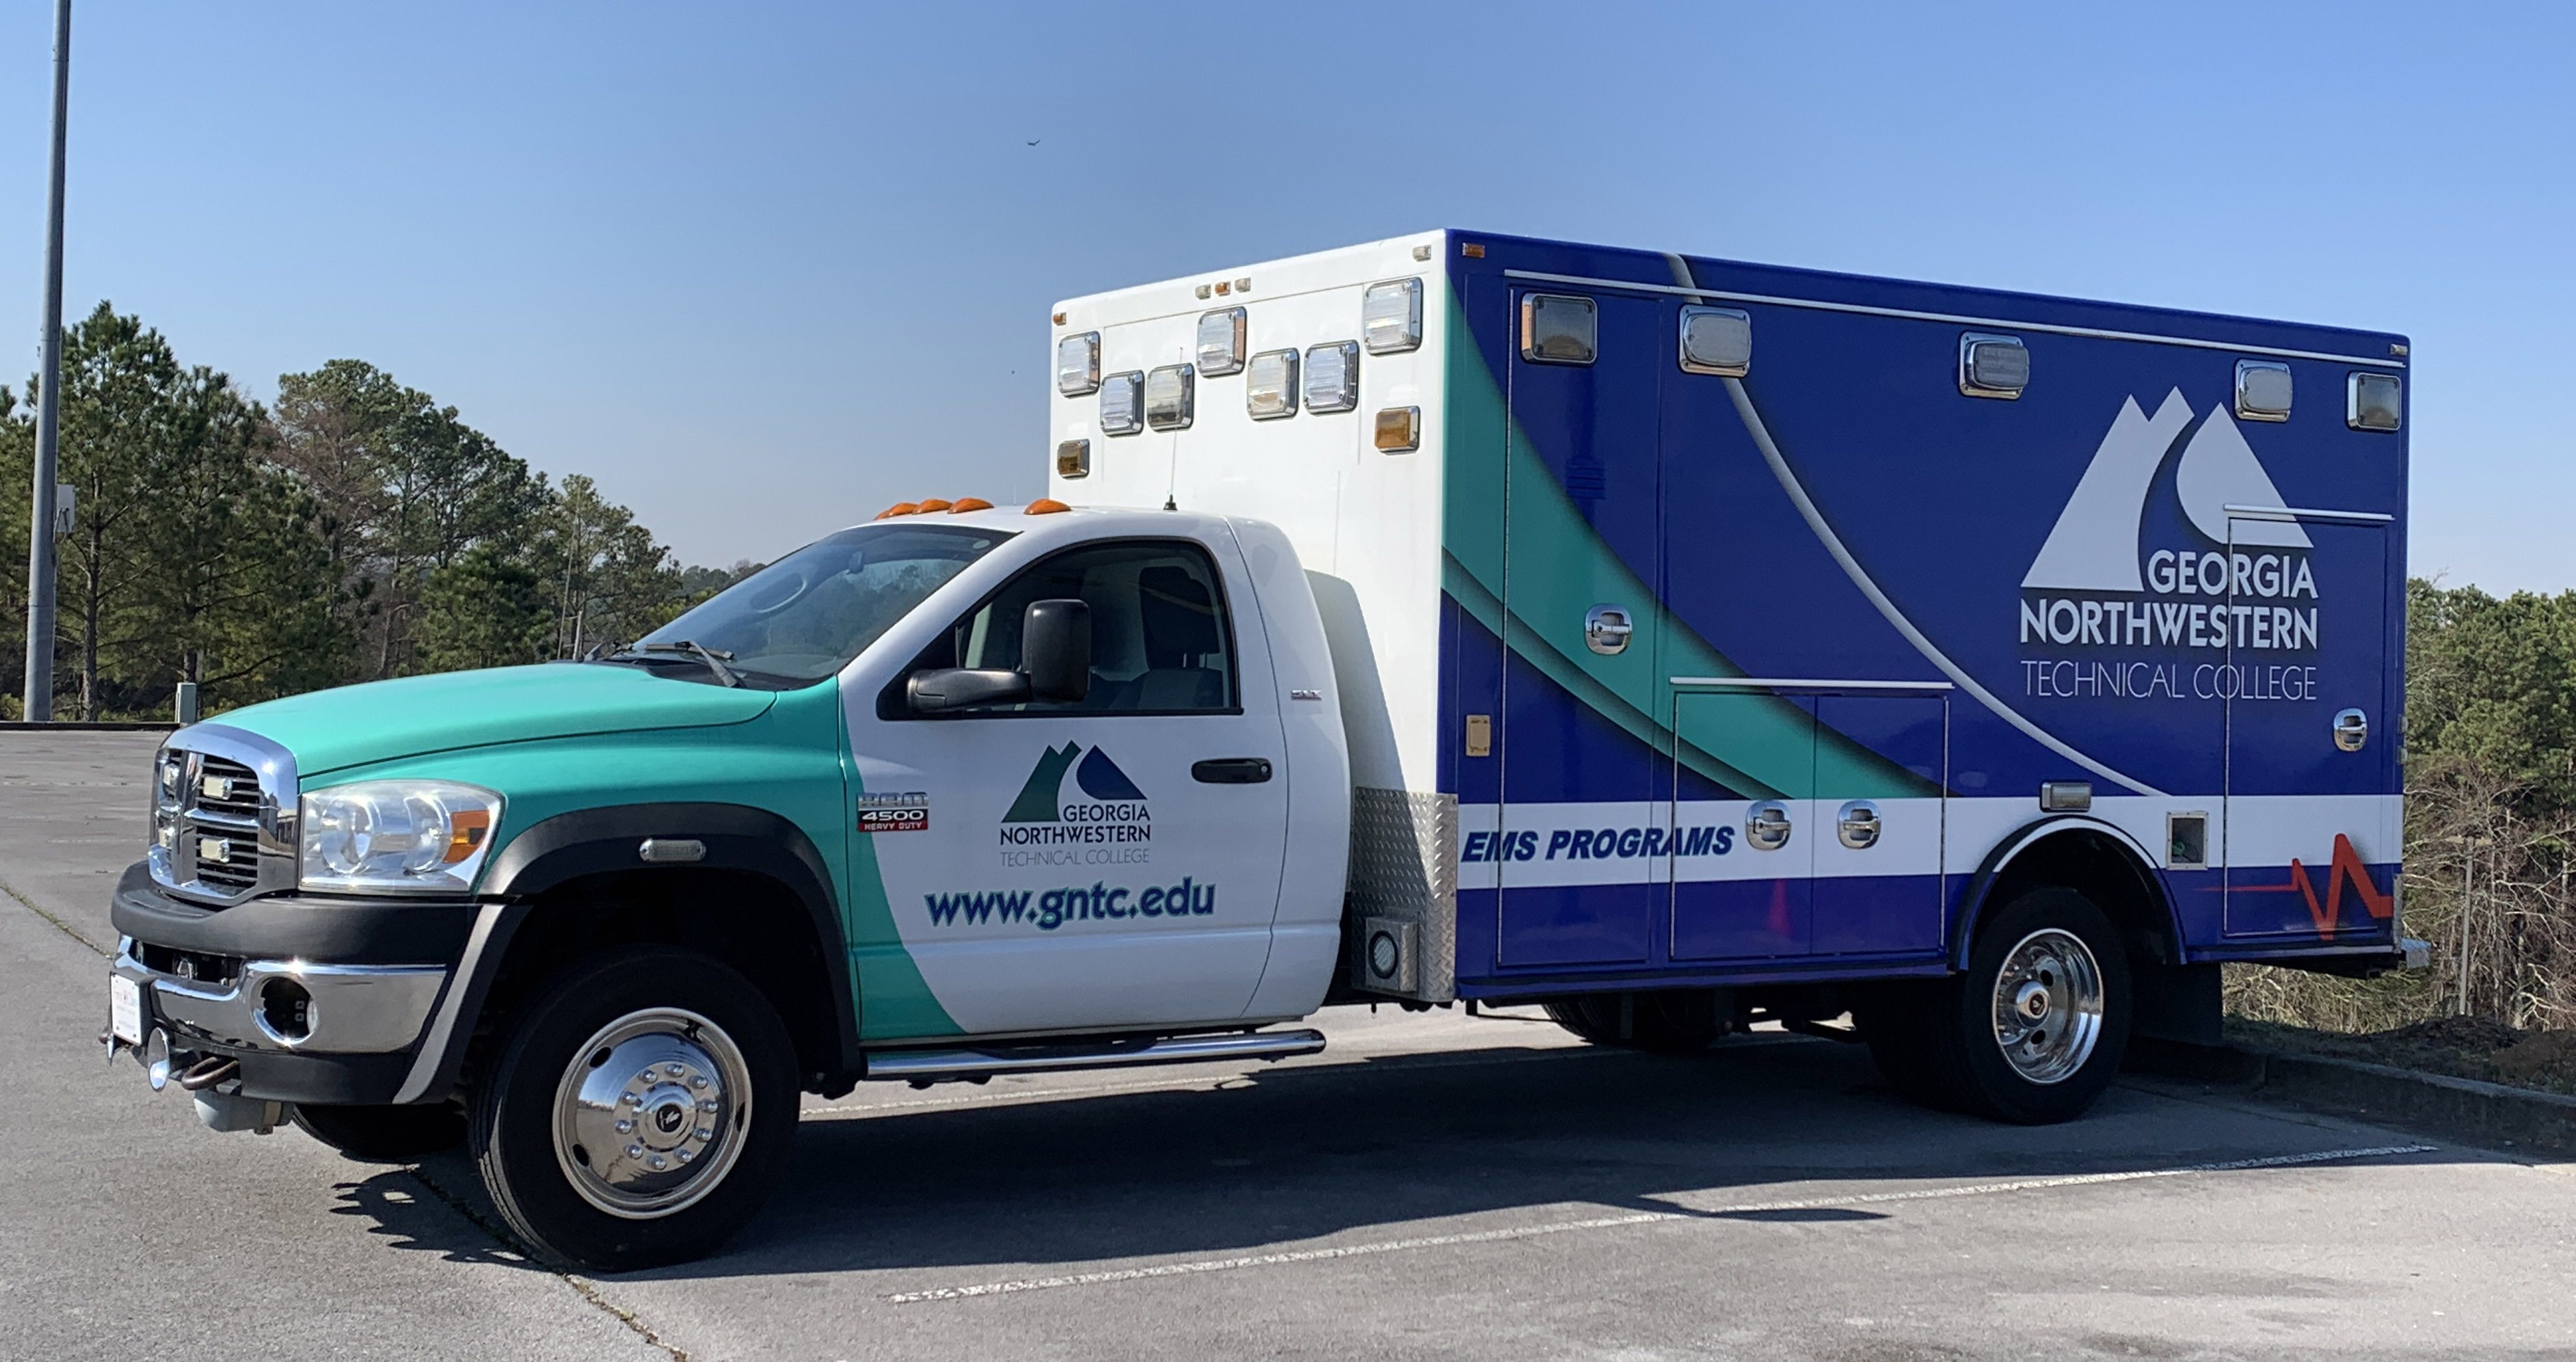 GNTC’s fully-equipped ambulance can be taken to any GNTC campus to provide hands-on training.